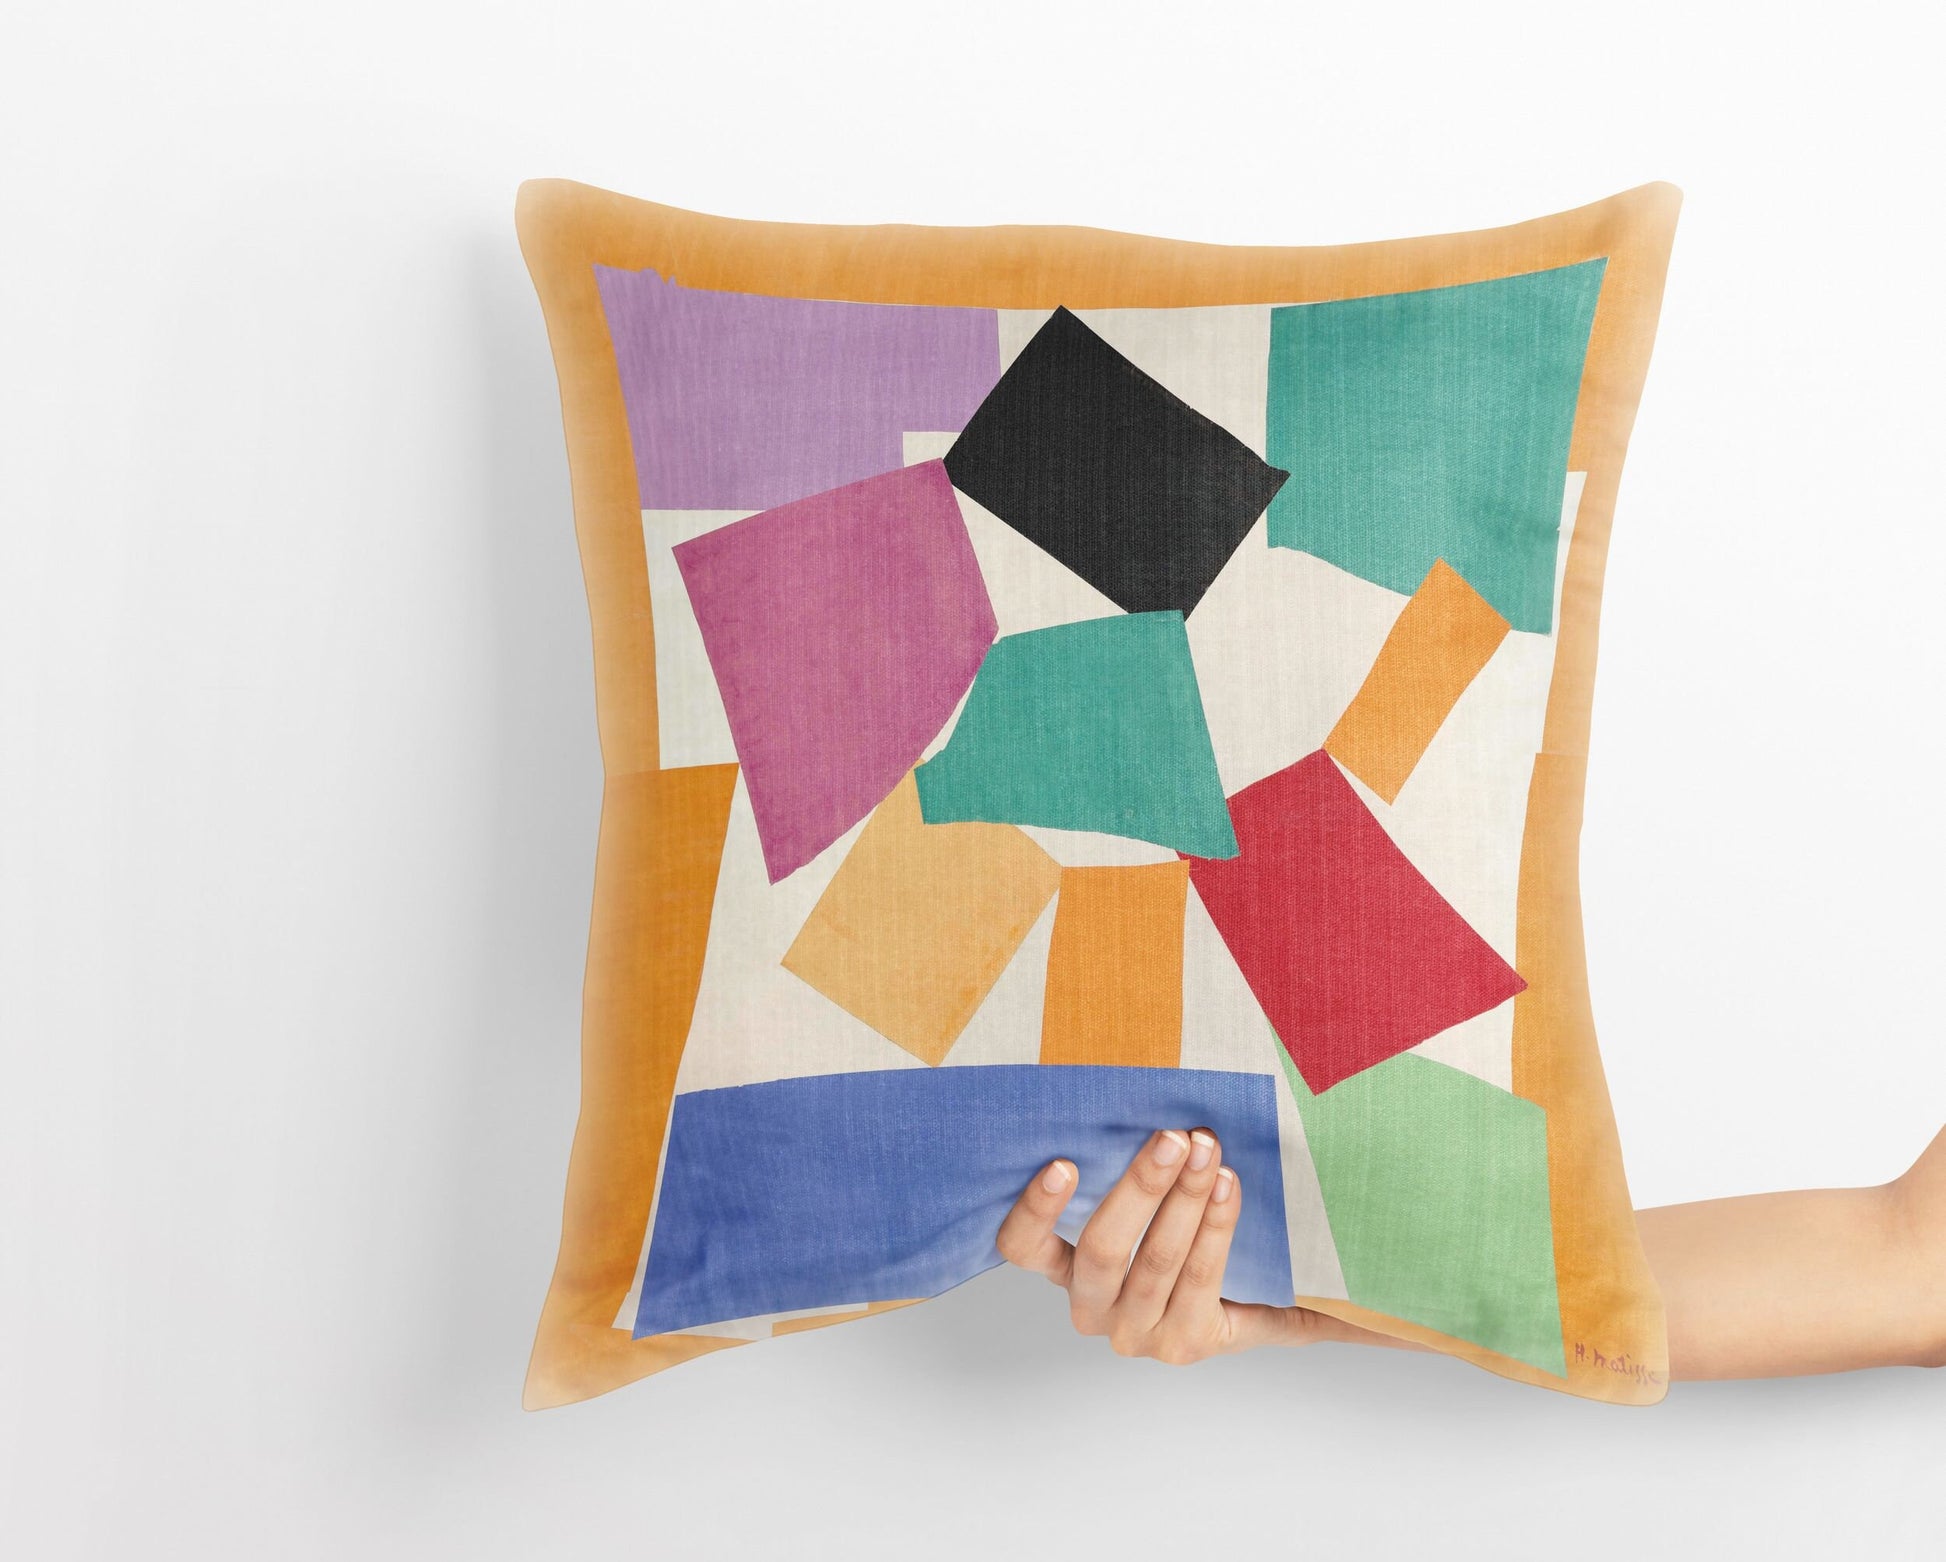 Henri Matisse Famous Painting, Throw Pillow, Abstract Throw Pillow Cover, Soft Pillow Cases, Colorful Pillow Case, Fauvist Pillow